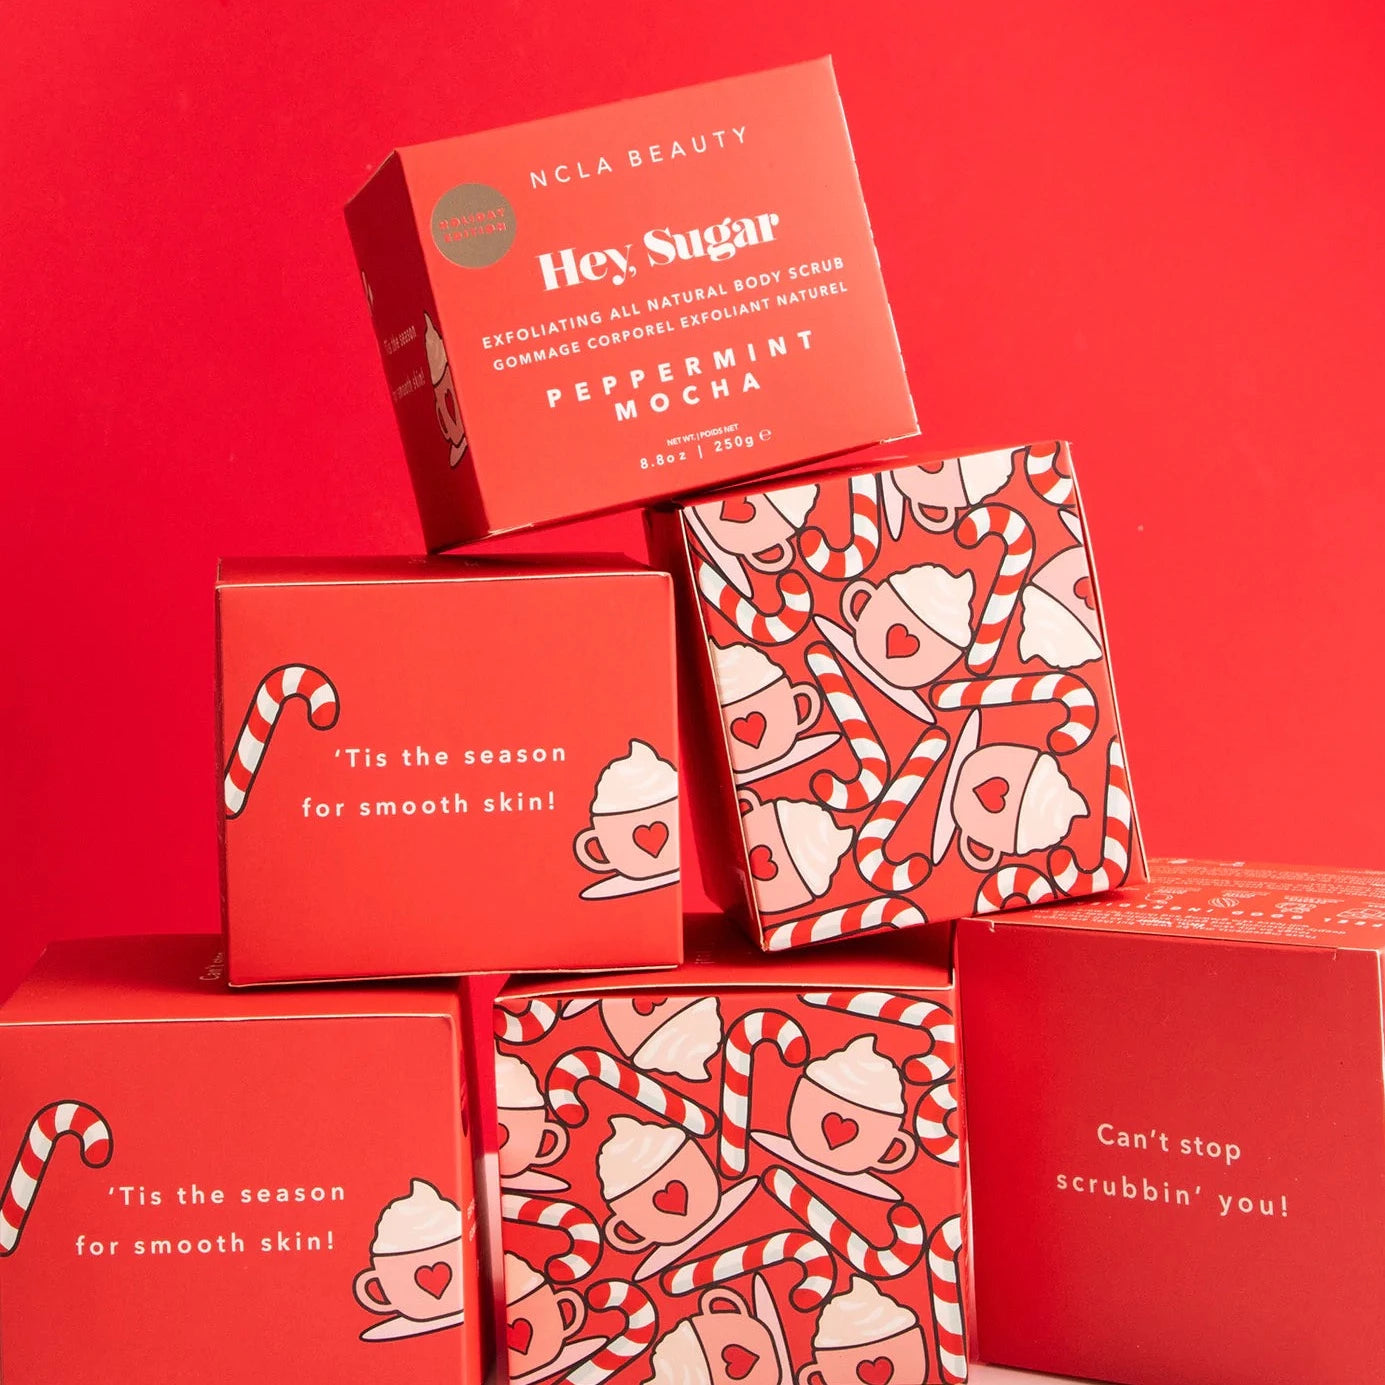 red box packaging for the Hey Sugar Peppermint Mocha Body Scrub. Box is red in the from with white text. Sides of boxes have cups of peppermint mocha printed on them along with candy canes